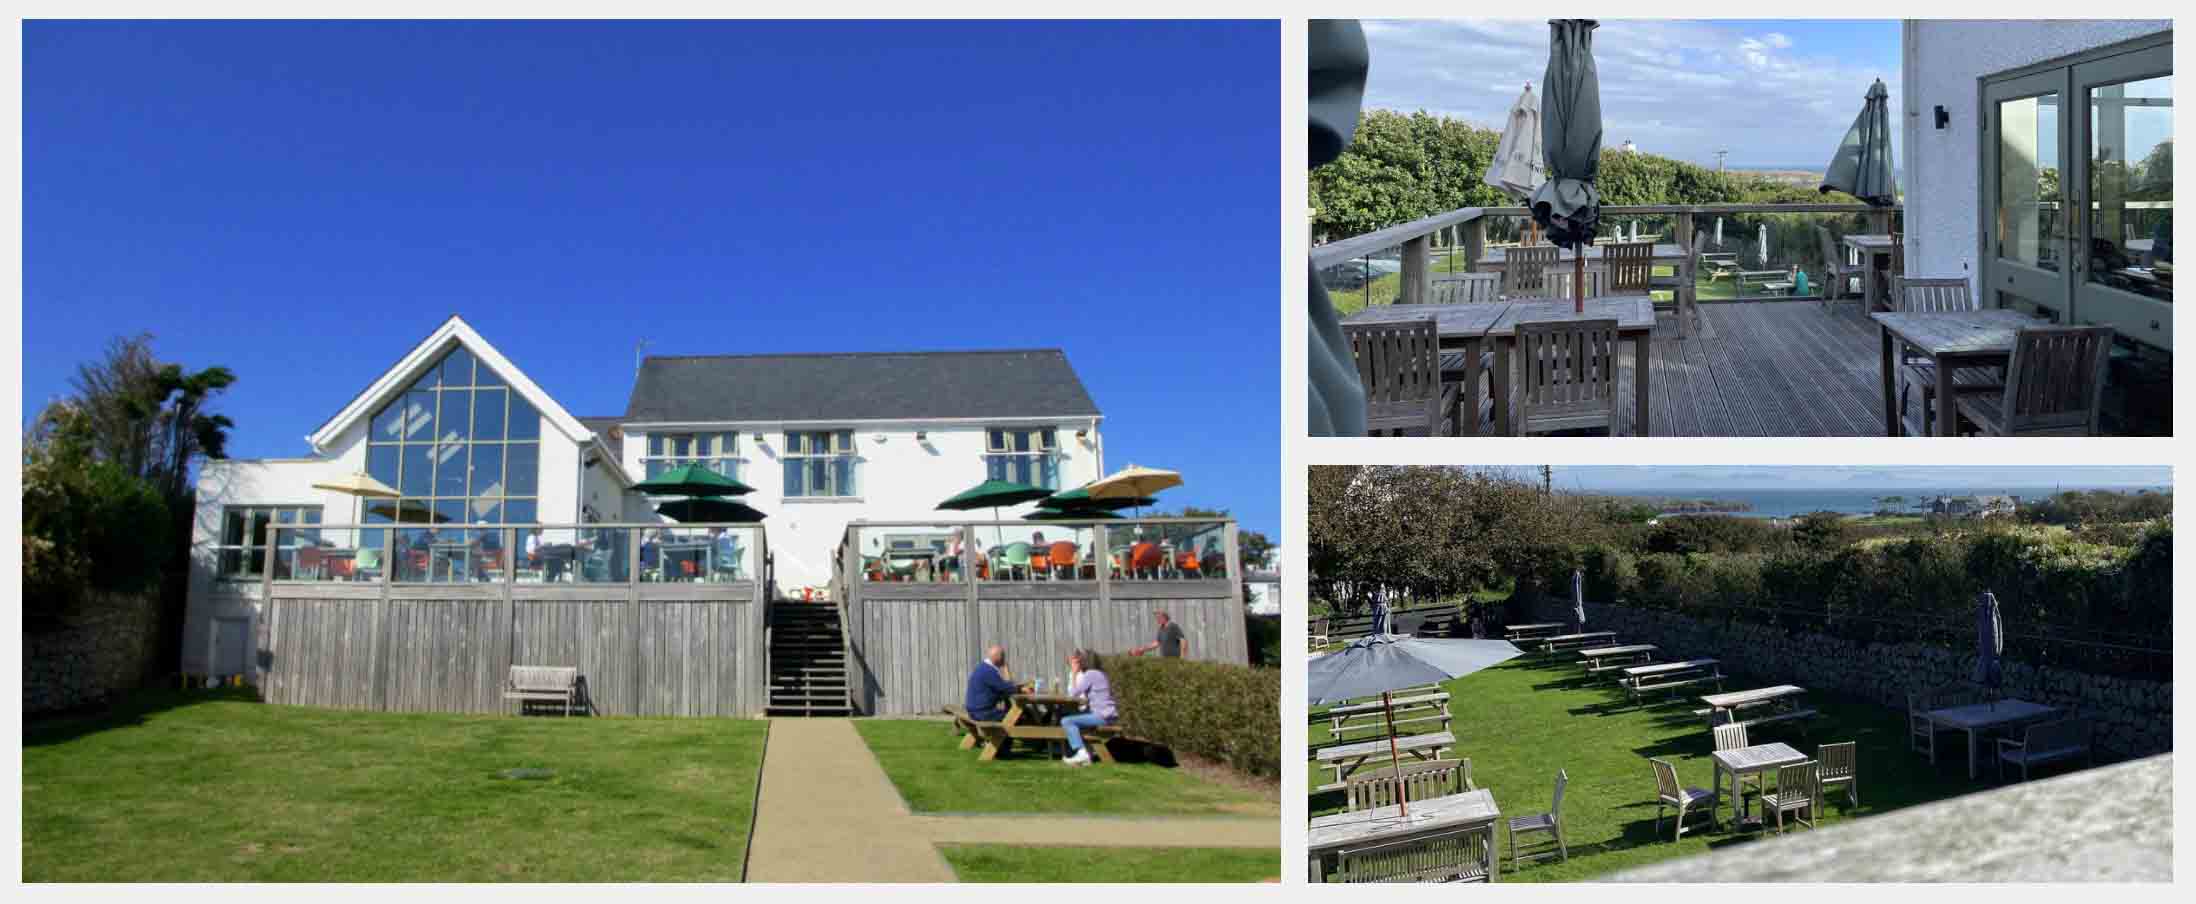 Best Beer Gardens in Wales - The White Eagle